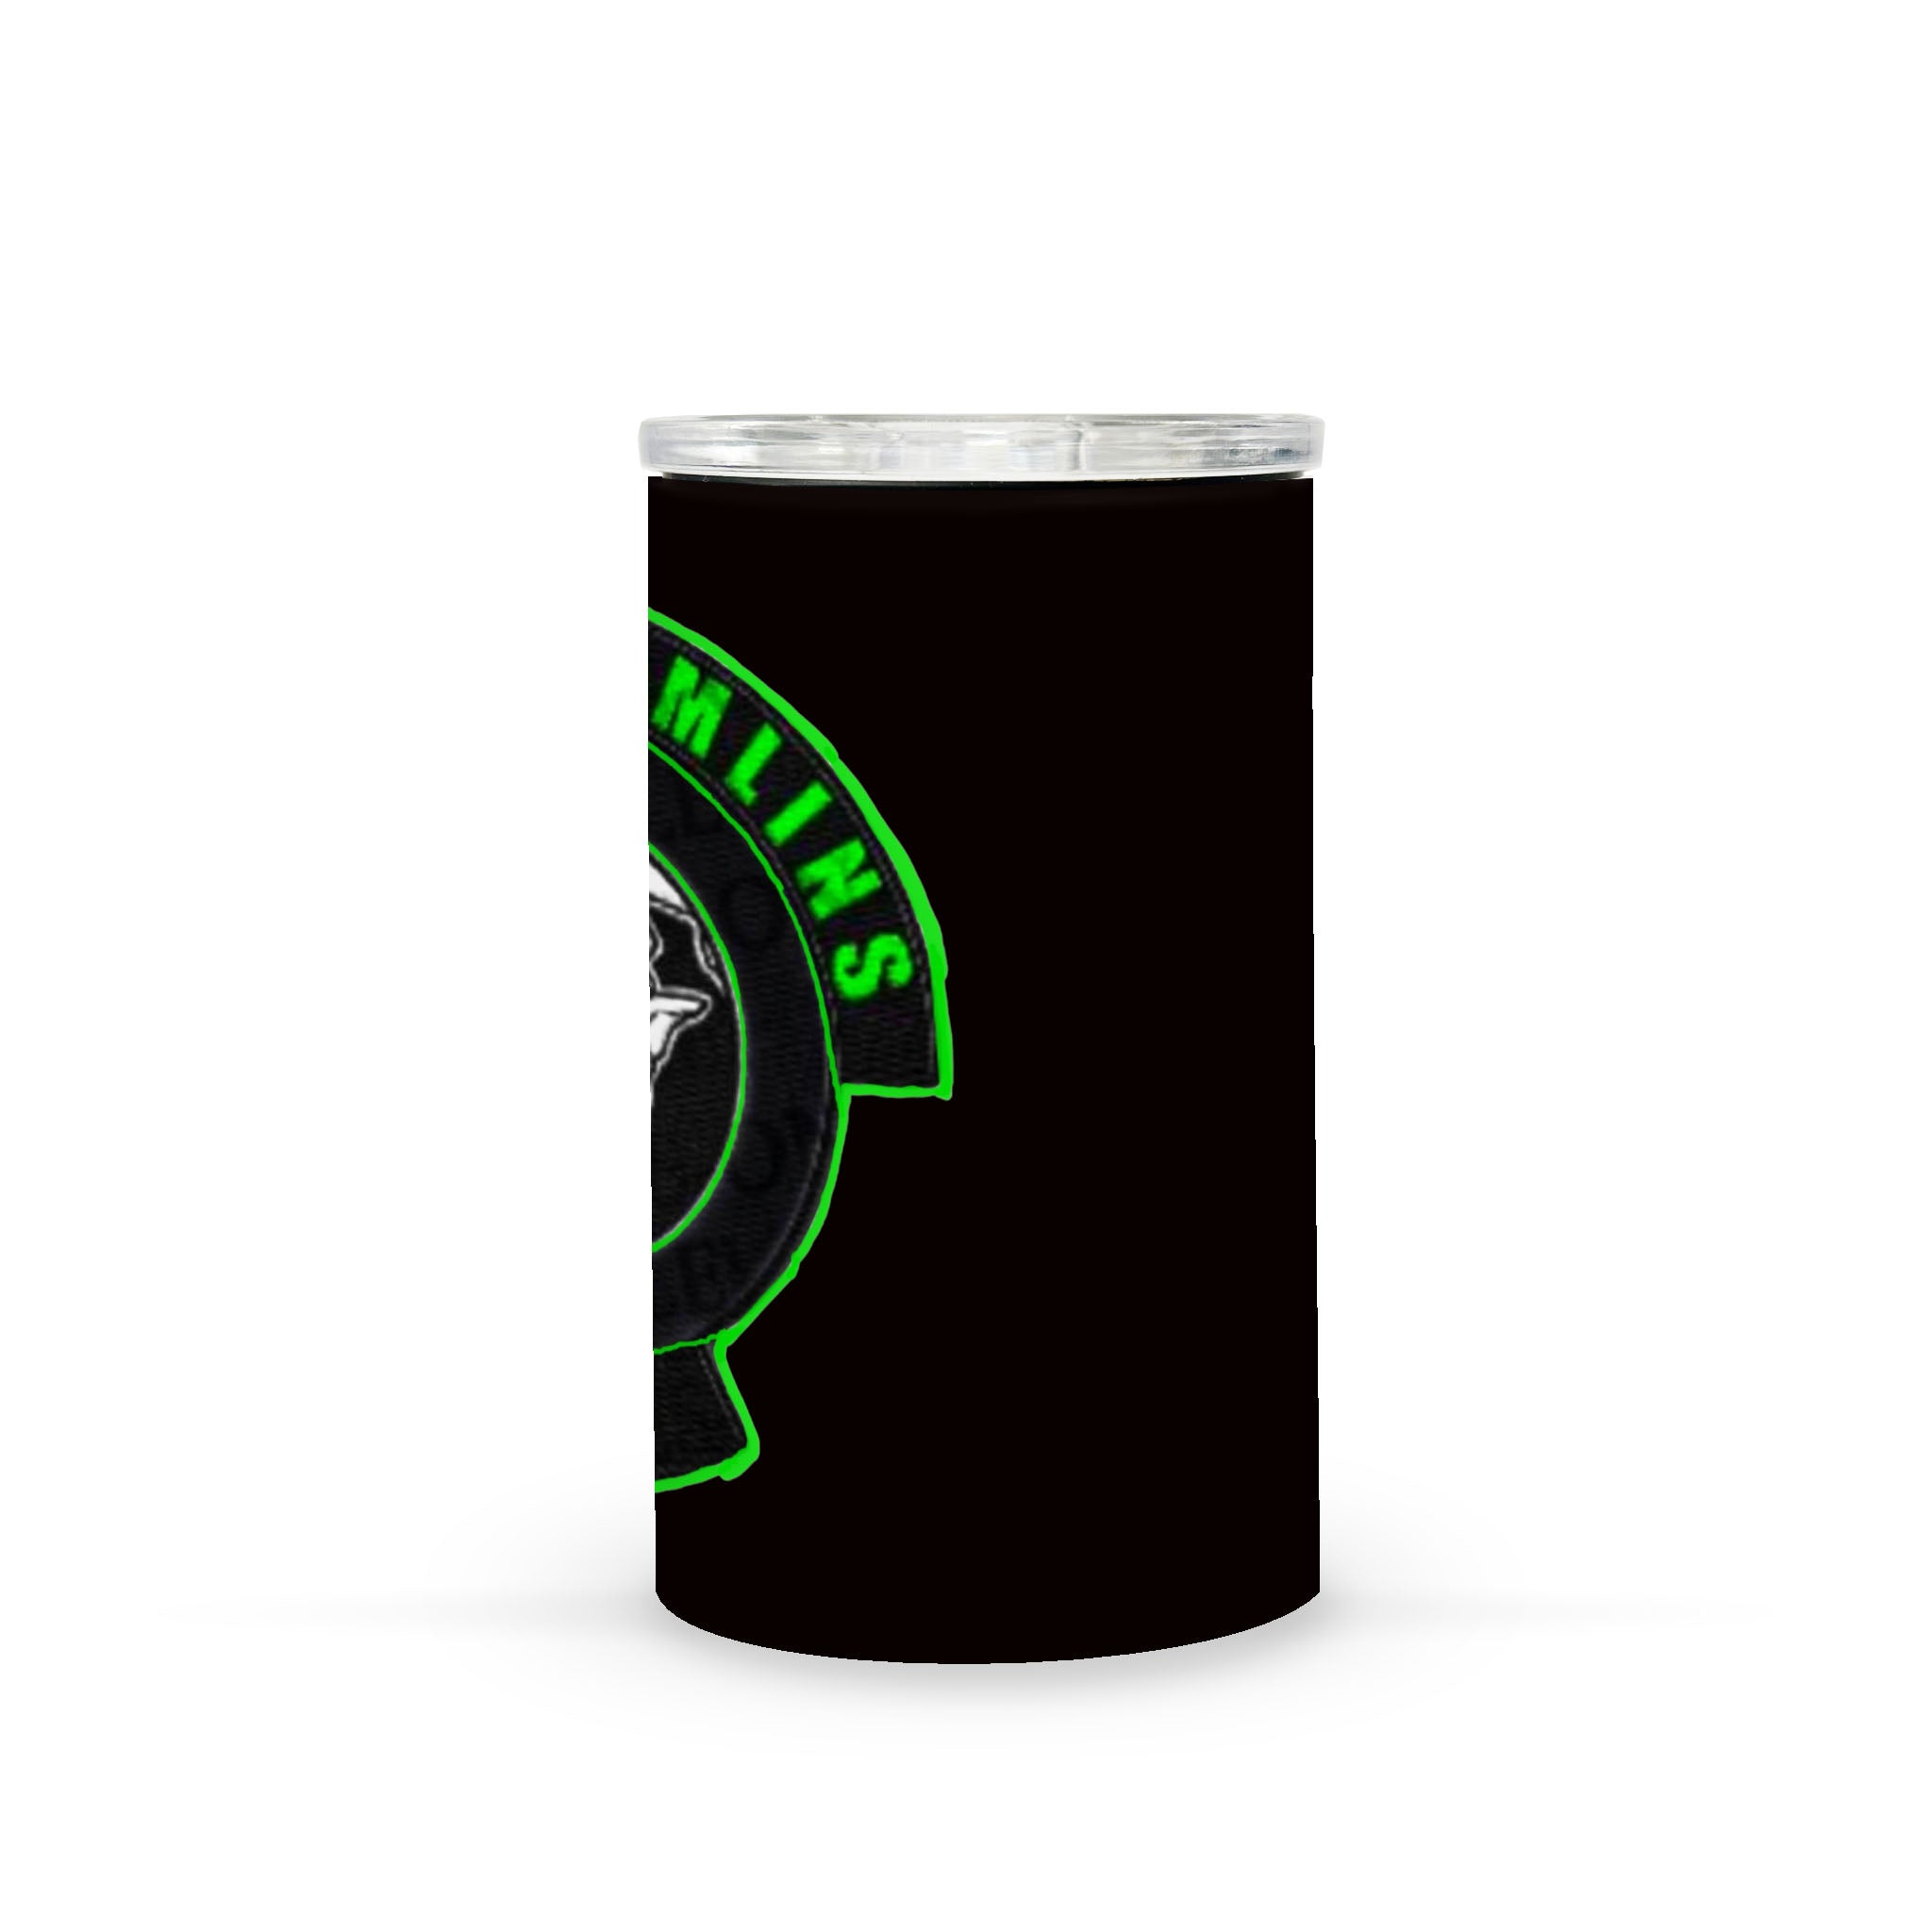 CC 4-in-1 Can Cooler Tumbler